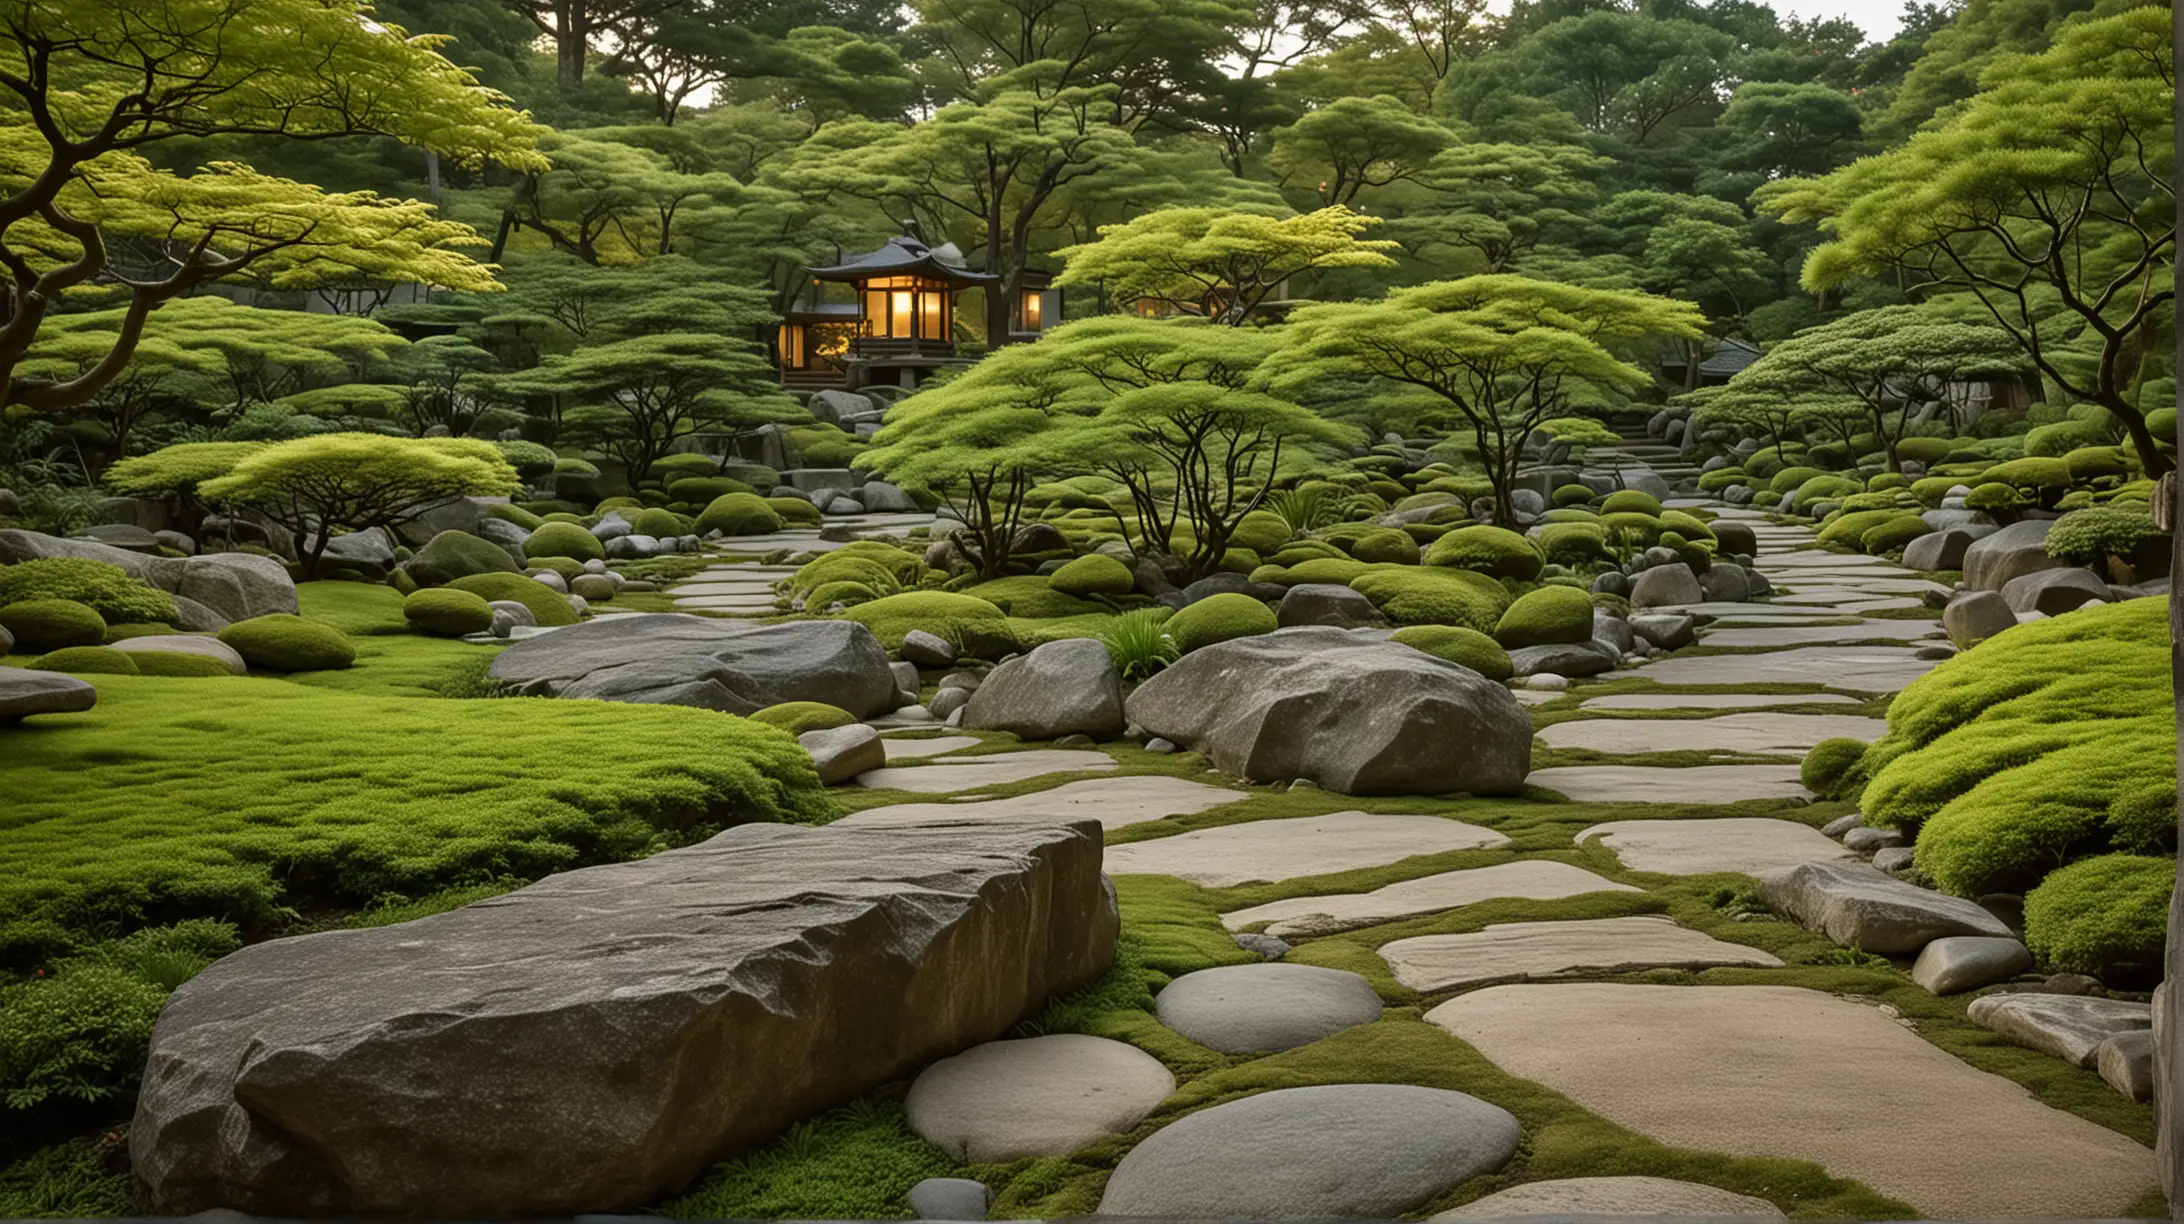 “A serene and traditional Japanese garden illuminated by the soft glow of lights from within the house, showcasing a harmonious blend of nature and architecture, with lush green trees, a stone path, moss-covered rocks, and a unique rock formation as its centerpiece. This image captures a tranquil Japanese garden at dusk, highlighting the peaceful coexistence of natural beauty and traditional architecture.”